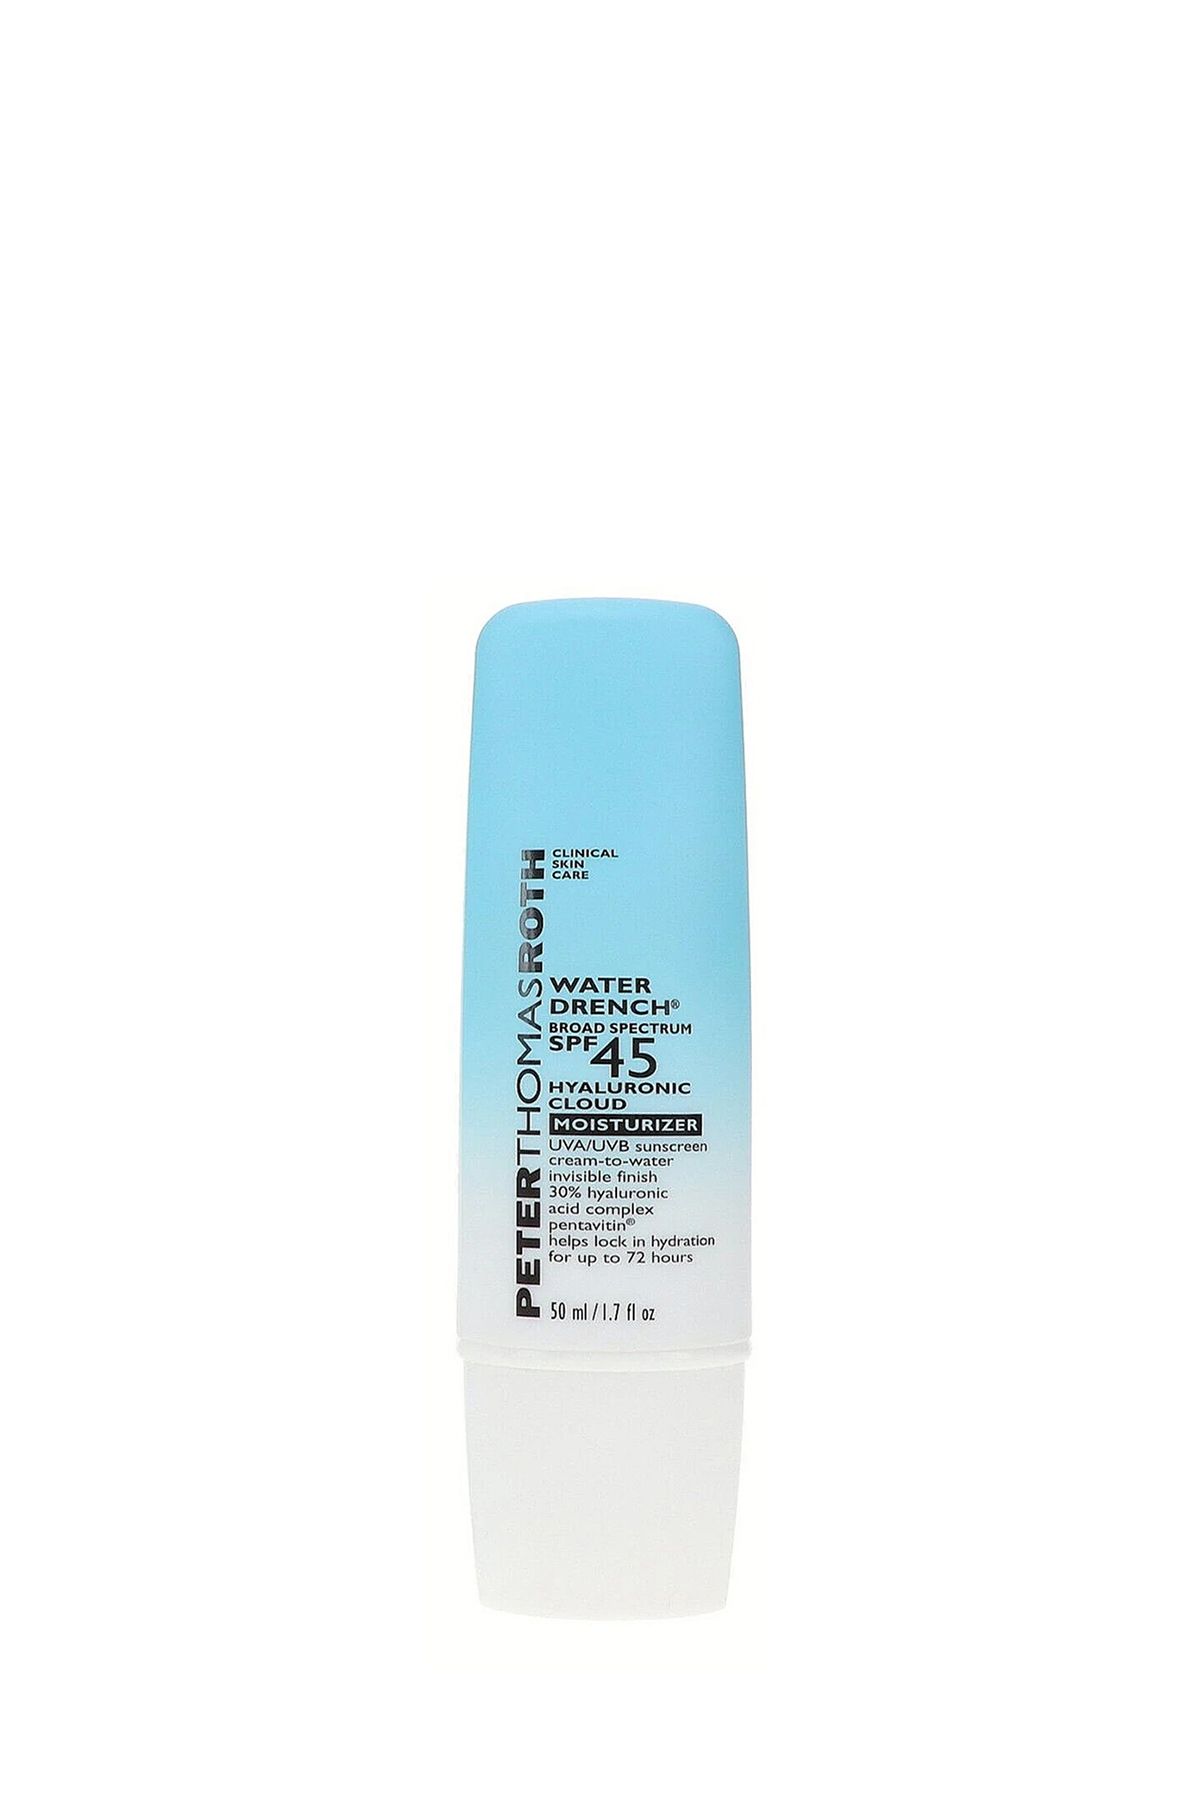 PETER THOMAS ROTH Water Drench™ Broad Spectrum Spf 45 Hyaluronic Cloud Moisturizer - 50 ml